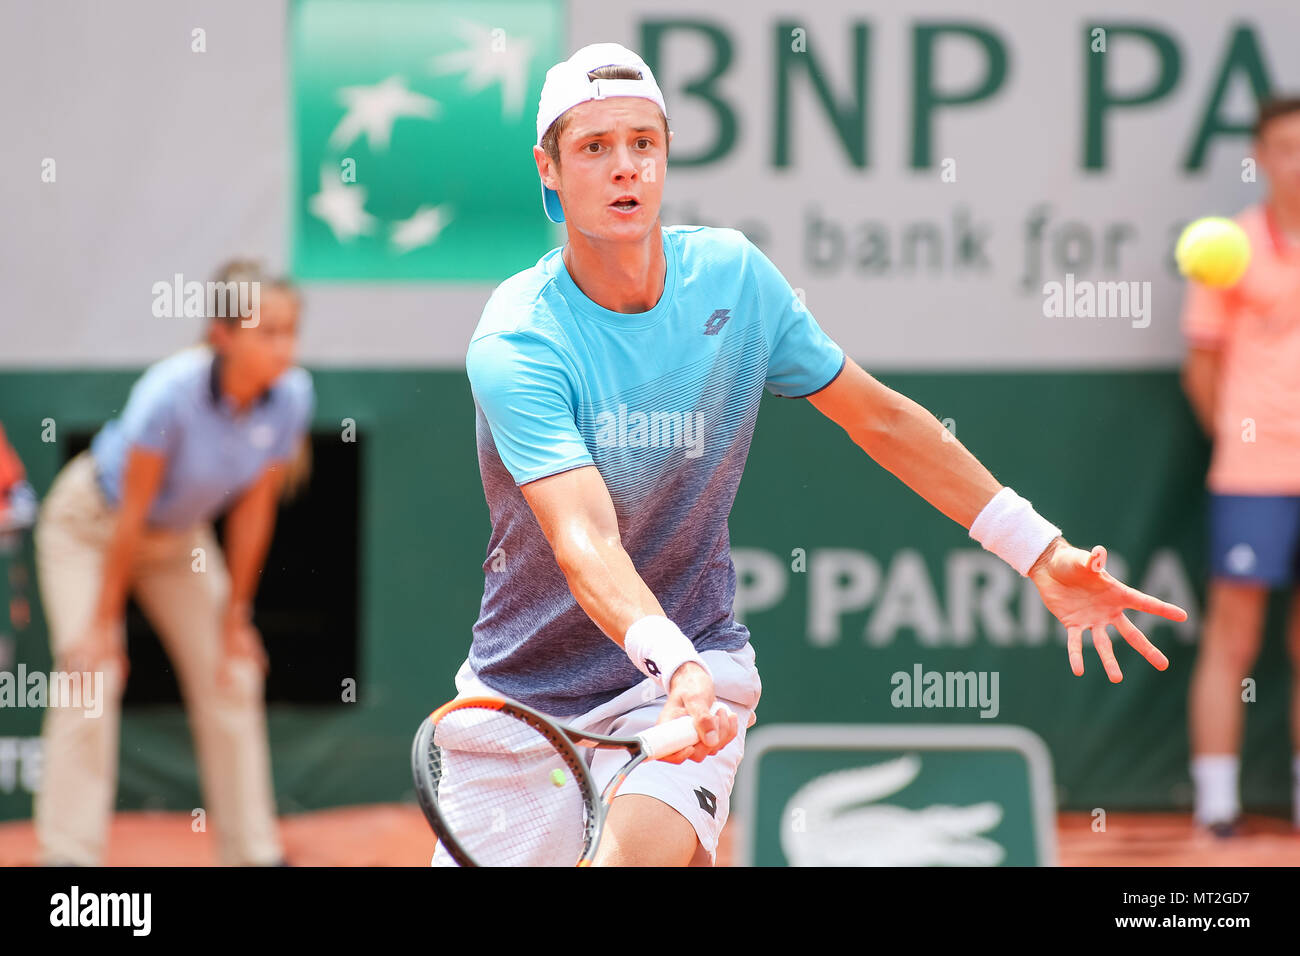 Paris, France. 27th May, 2018. Maxime Janvier (FRA) Tennis : Maxime Janvier  of France during the Men's singles first round match of the French Open  tennis tournament against Kei Nishikori of Japan